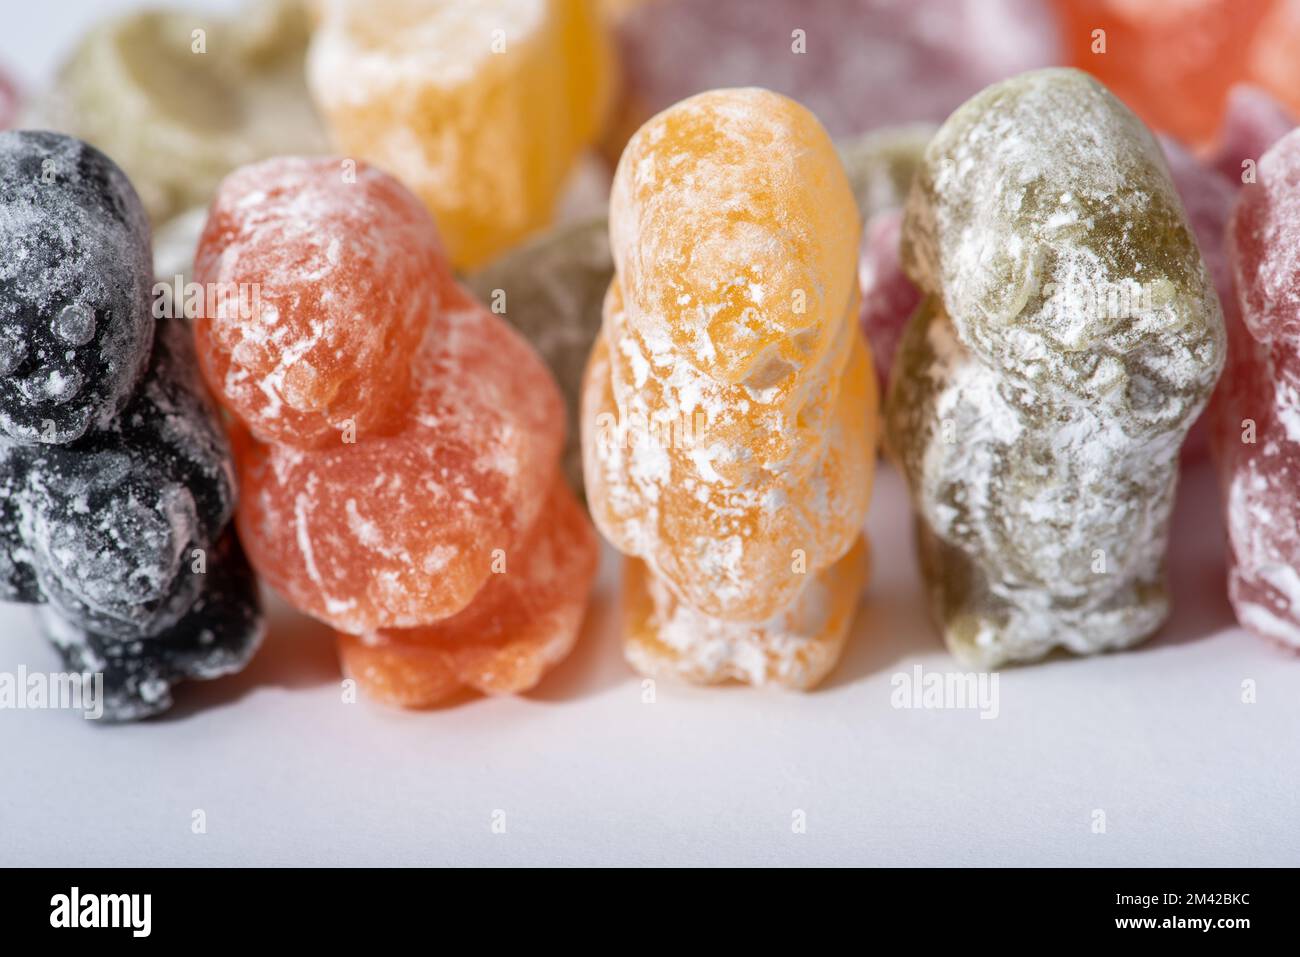 Jelly Babies Sweets Confectionary UK Stockfoto